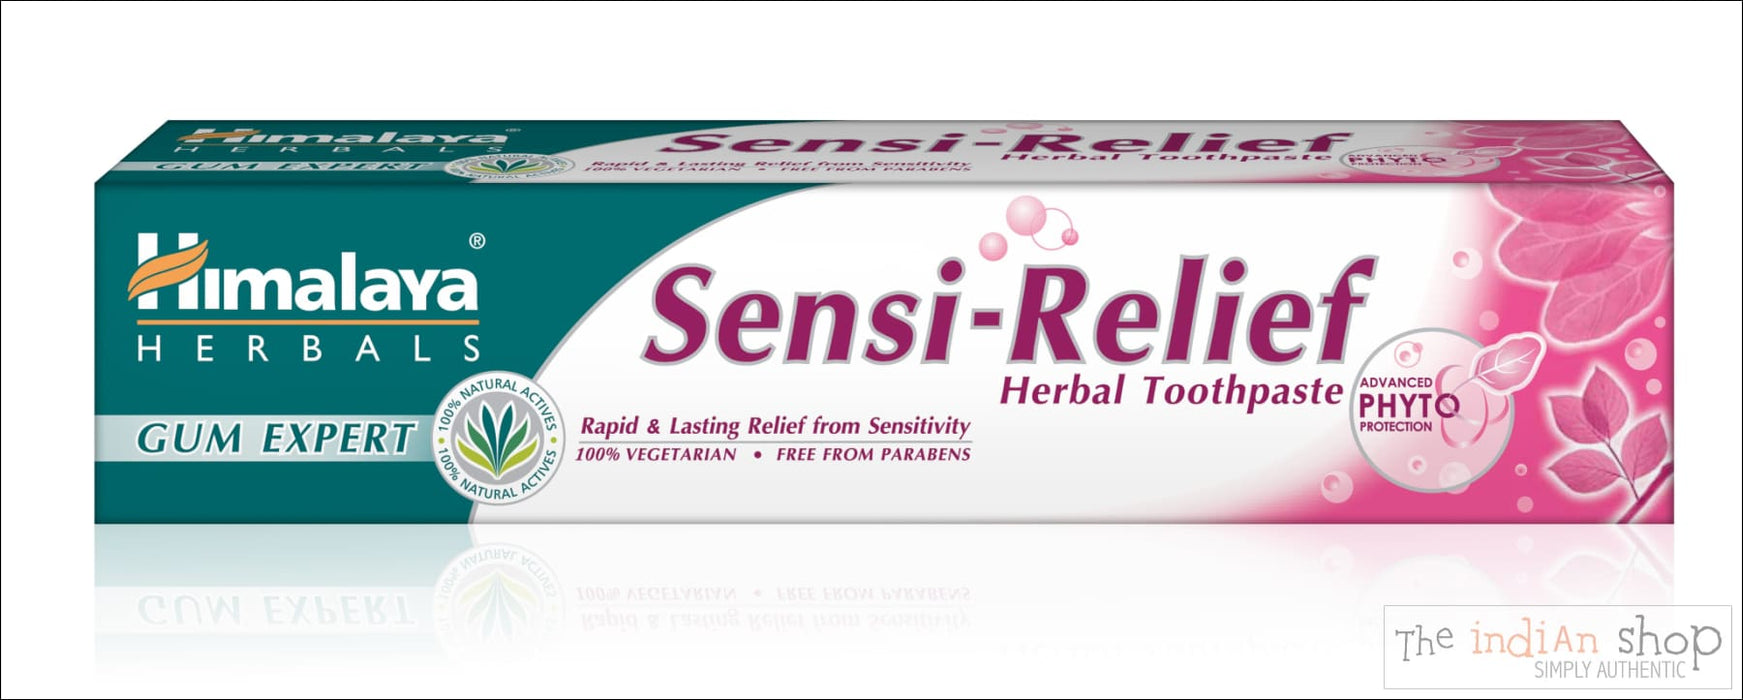 Himalaya Sensi-Relief Toothpaste - Beauty and Health